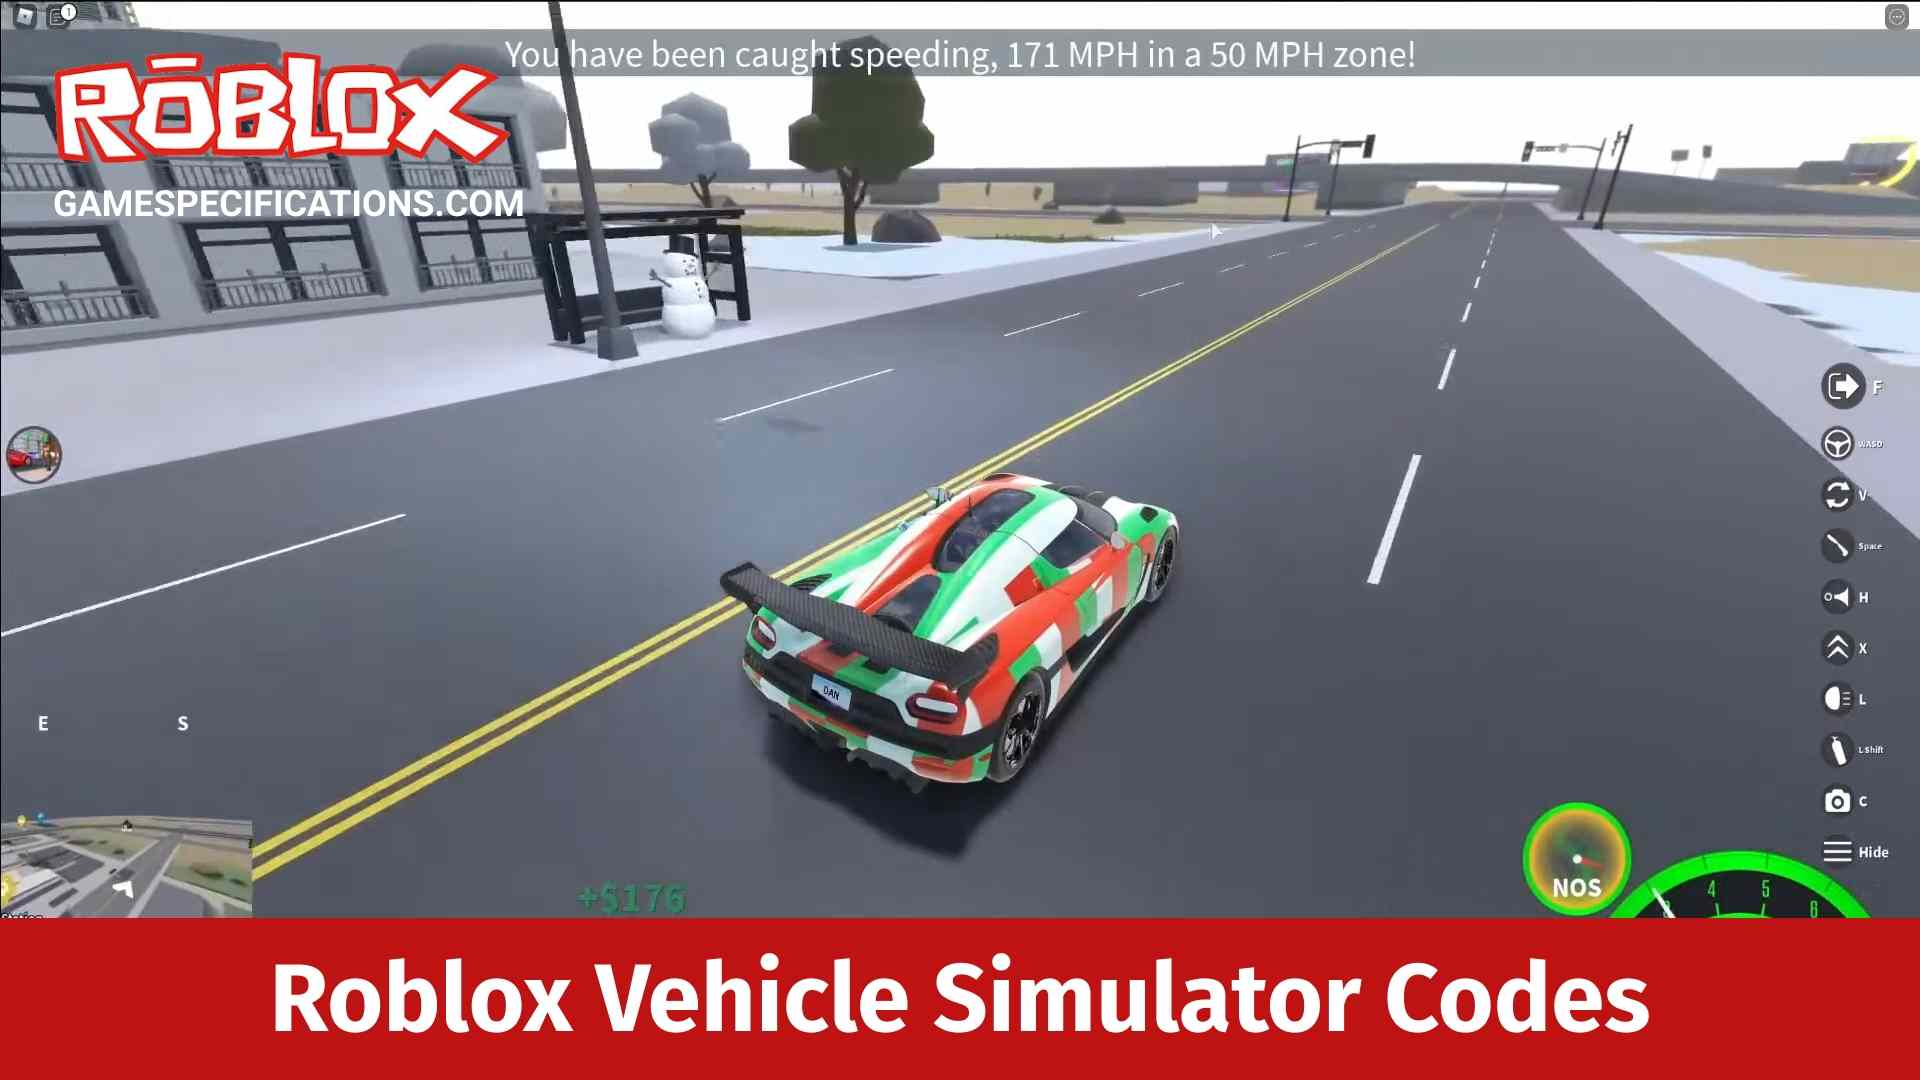 Roblox Vehicle Simulator Codes July 2021 Game Specifications - roblox car simulator secrets